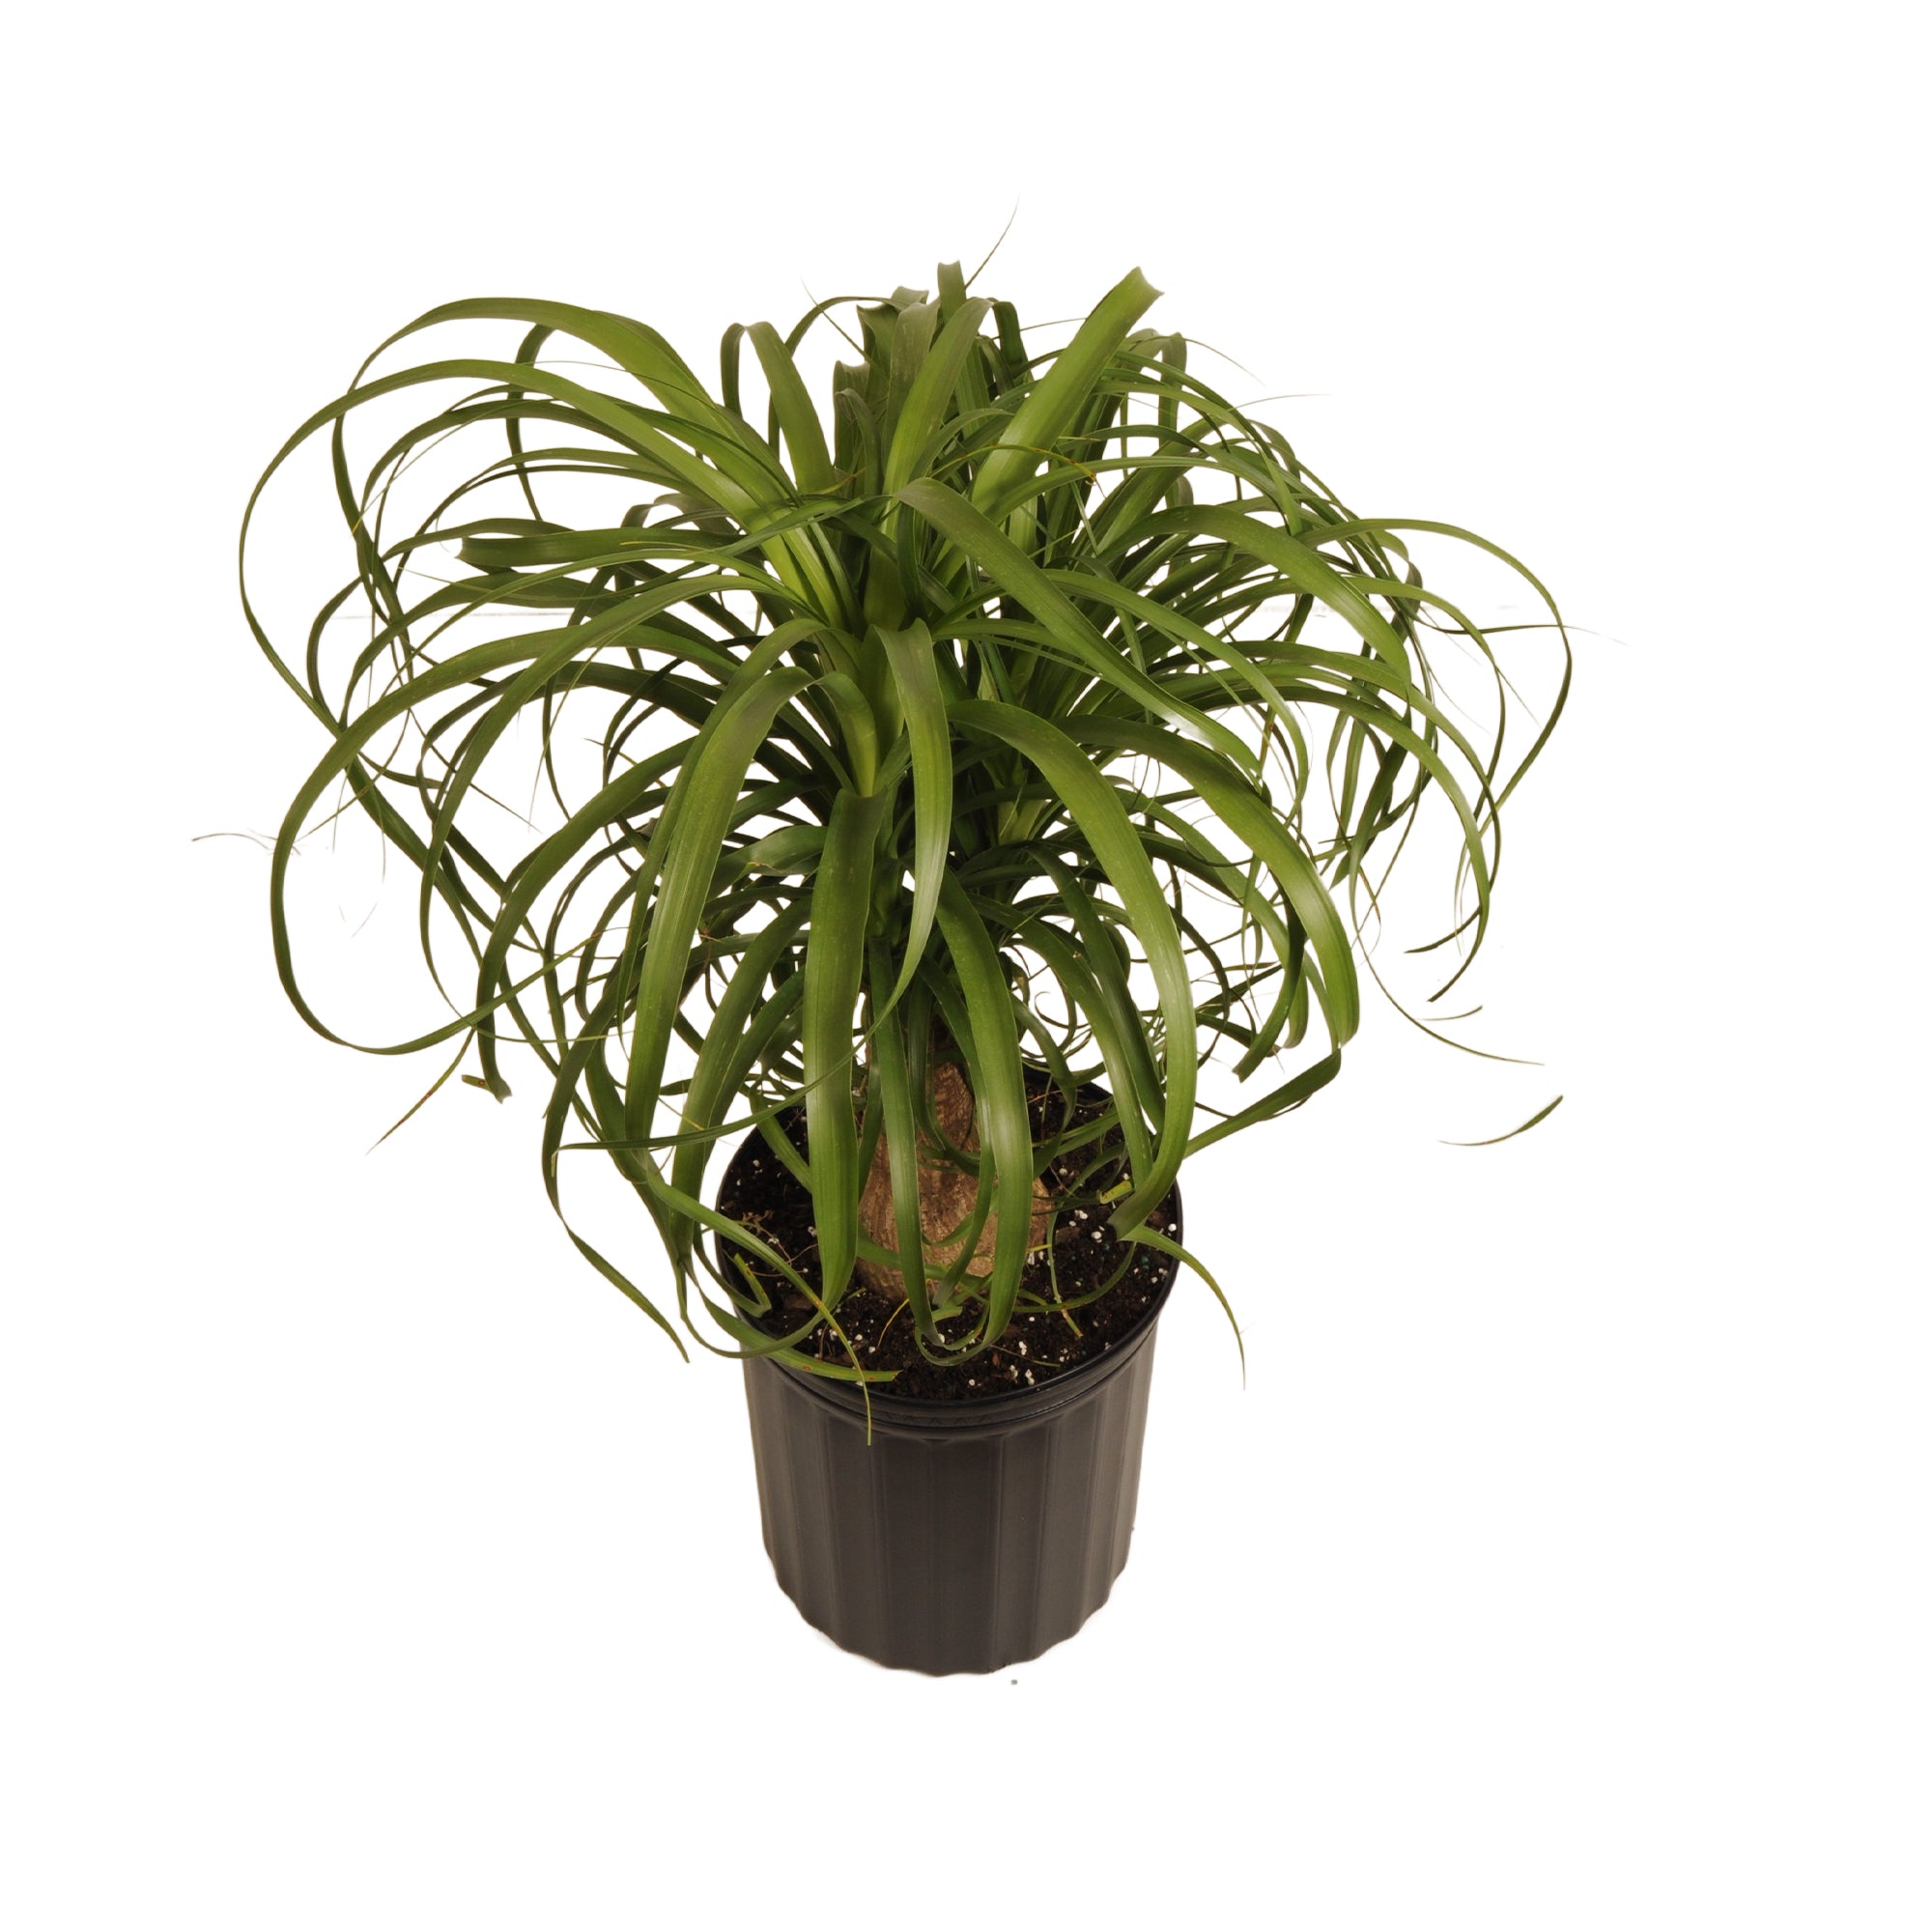 United Nursery Live Ponytail Palm 24-32in Tall Green Tropical houseplant in 10in Grower Pot